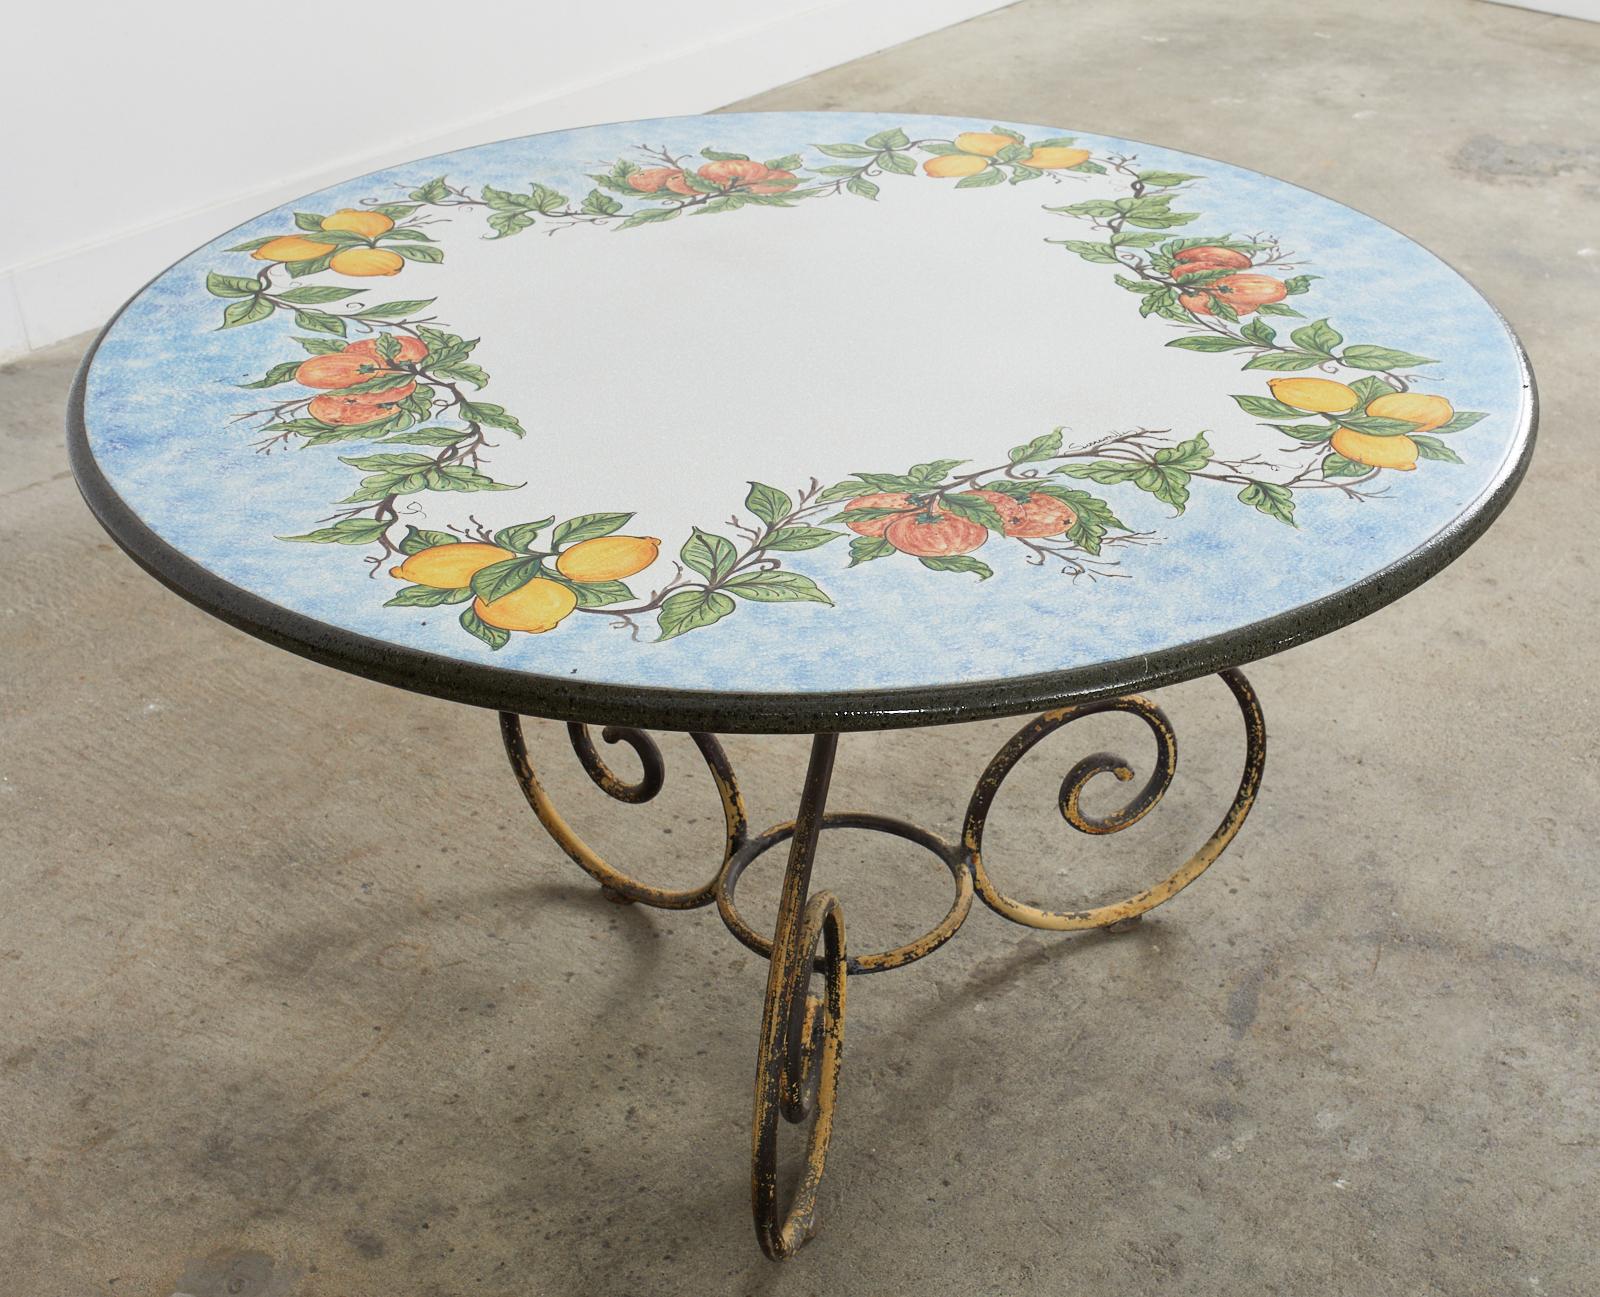 Italian Amalfi Style Glazed Stone and Iron Painted Garden Table For Sale 1